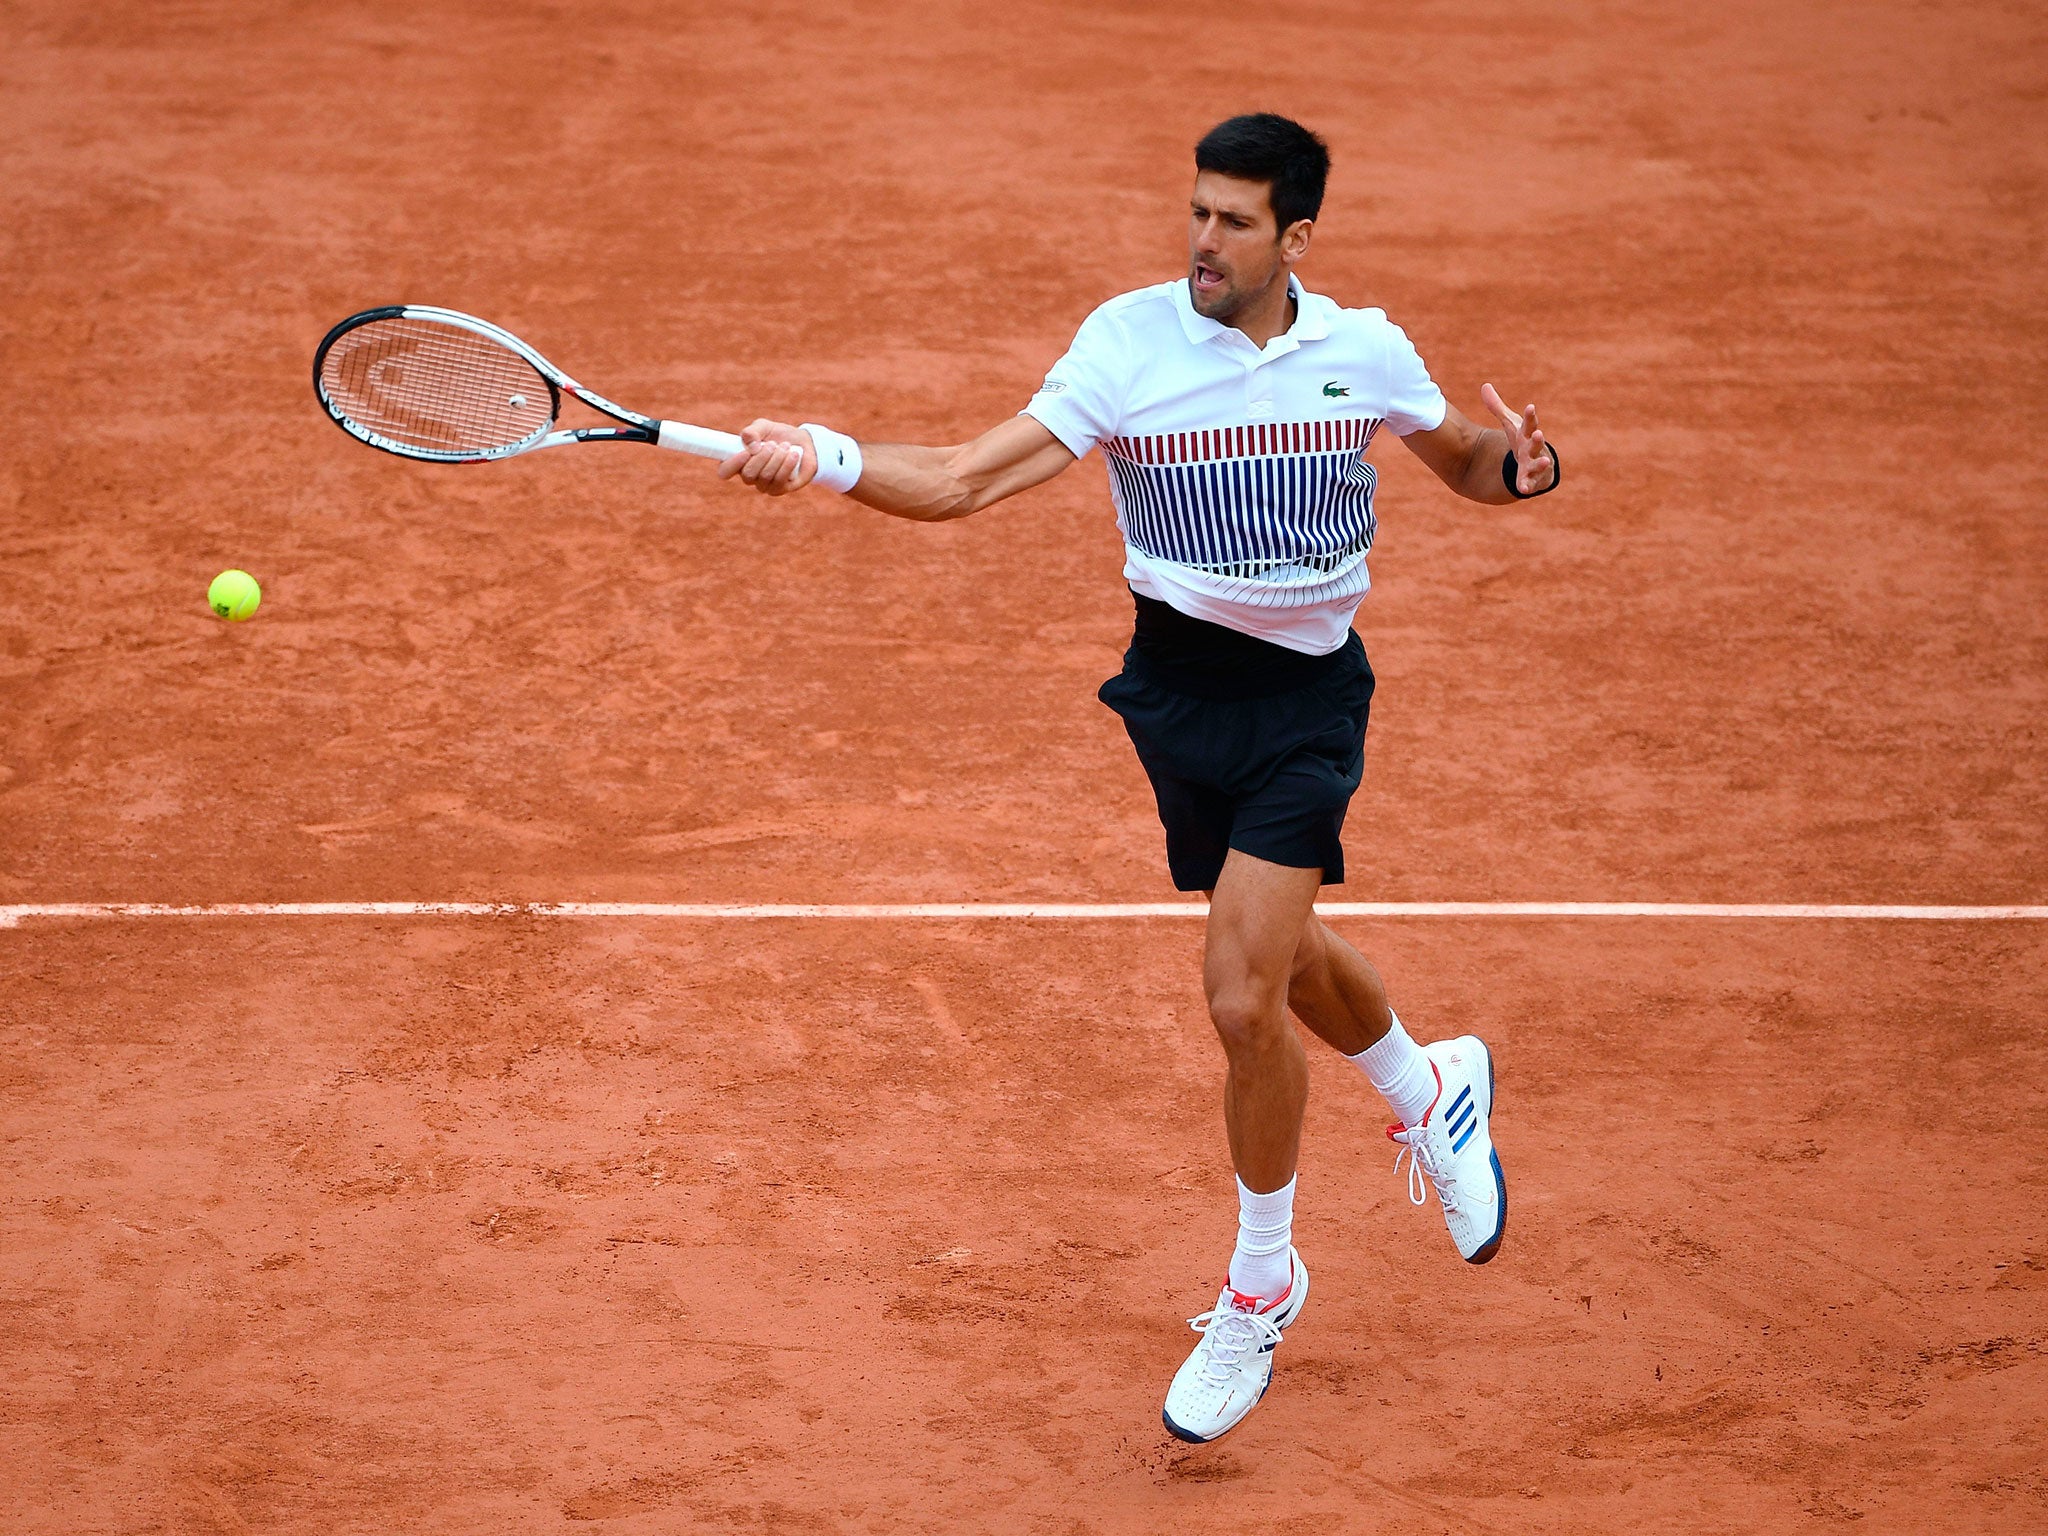 Djokovic is set to play at Eastbourne